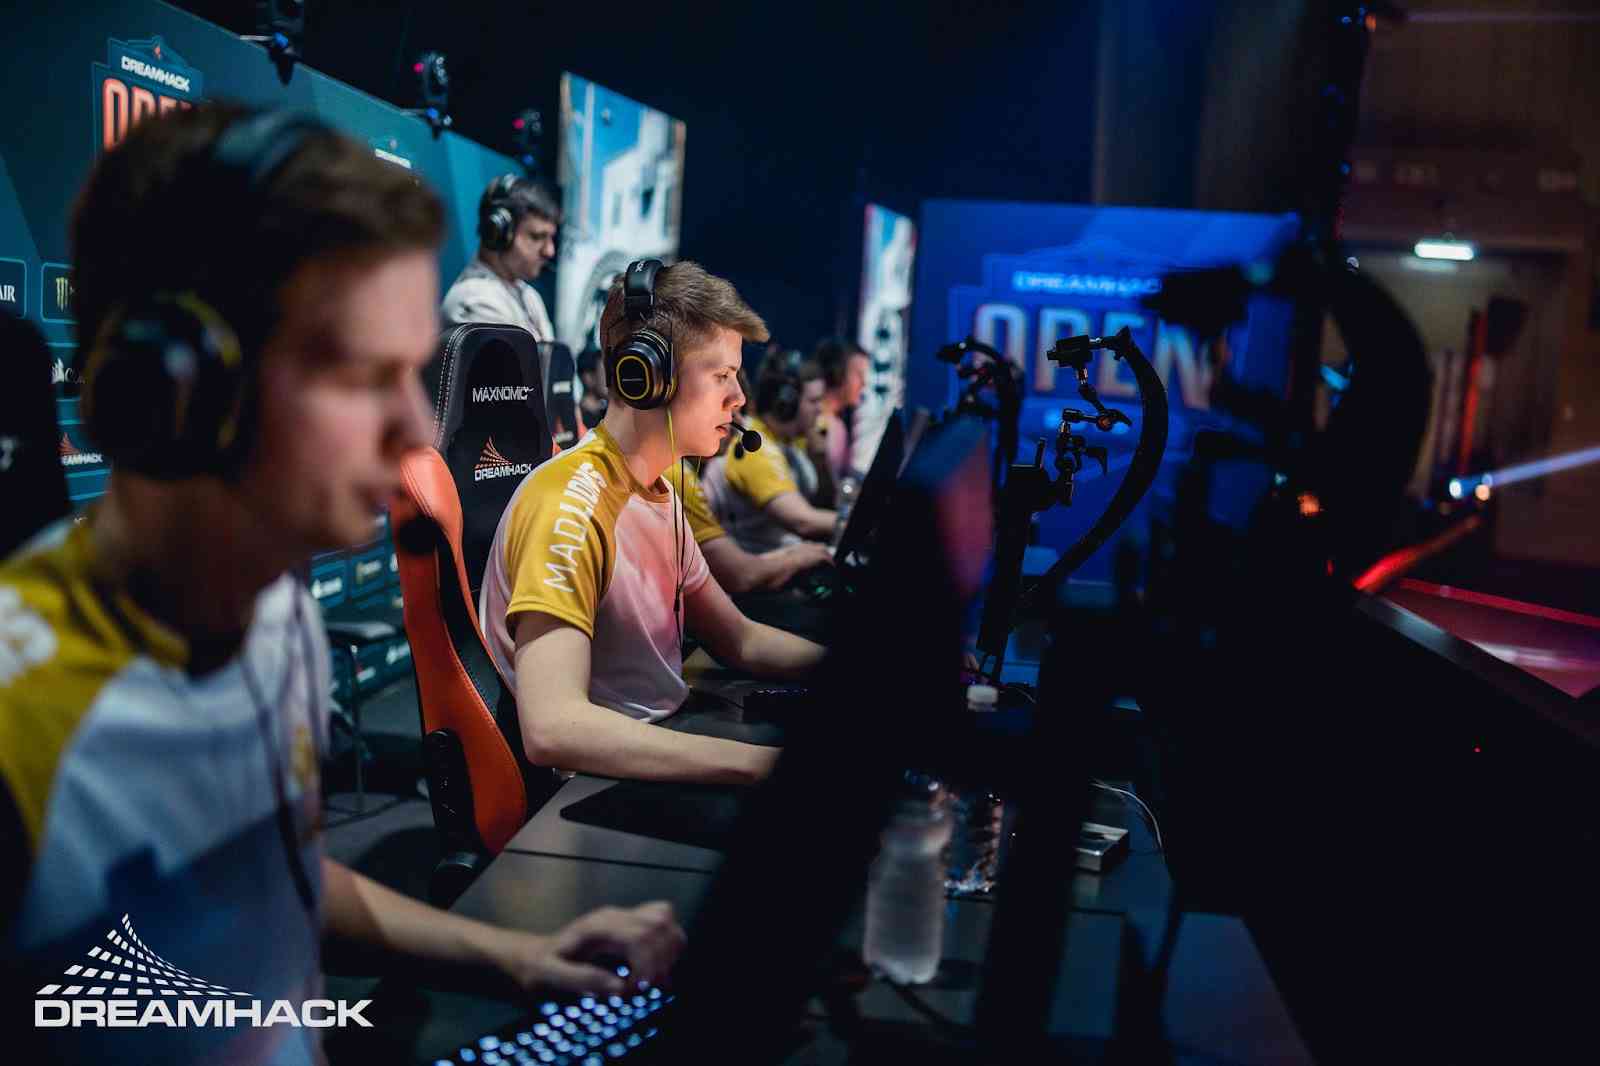 MAD Lions compete at DreamHack